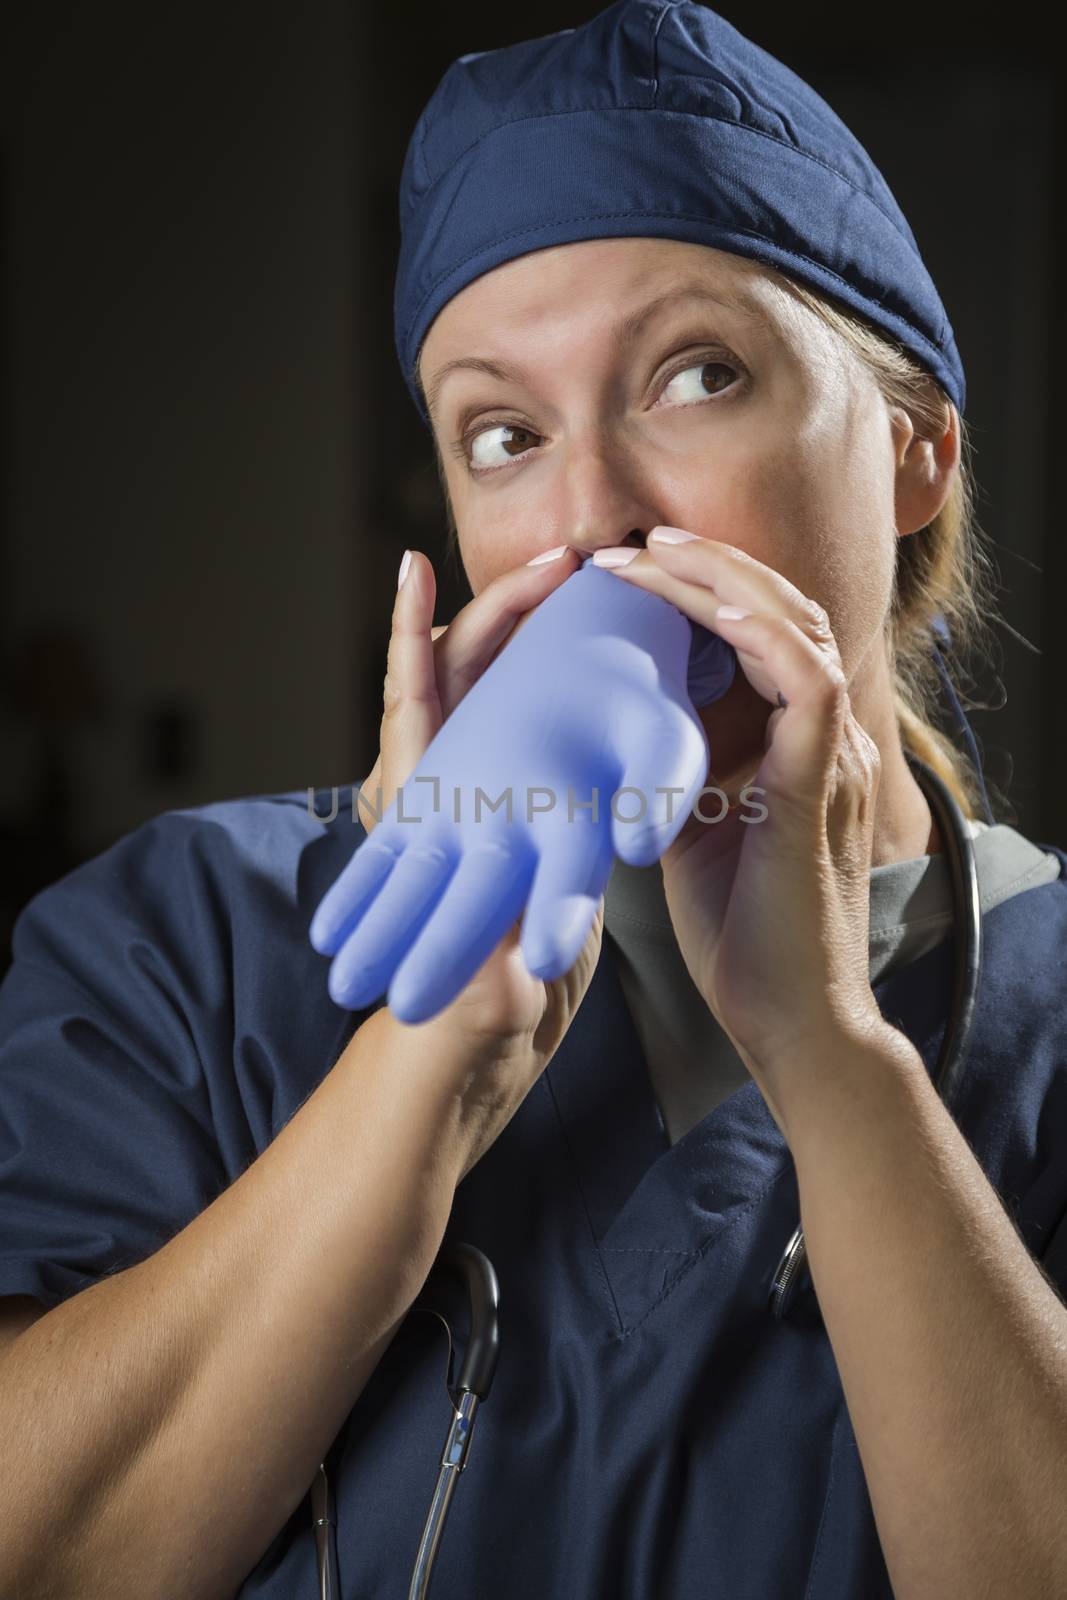 Playful Funny Doctor or Nurse Inflating Surgical Glove.